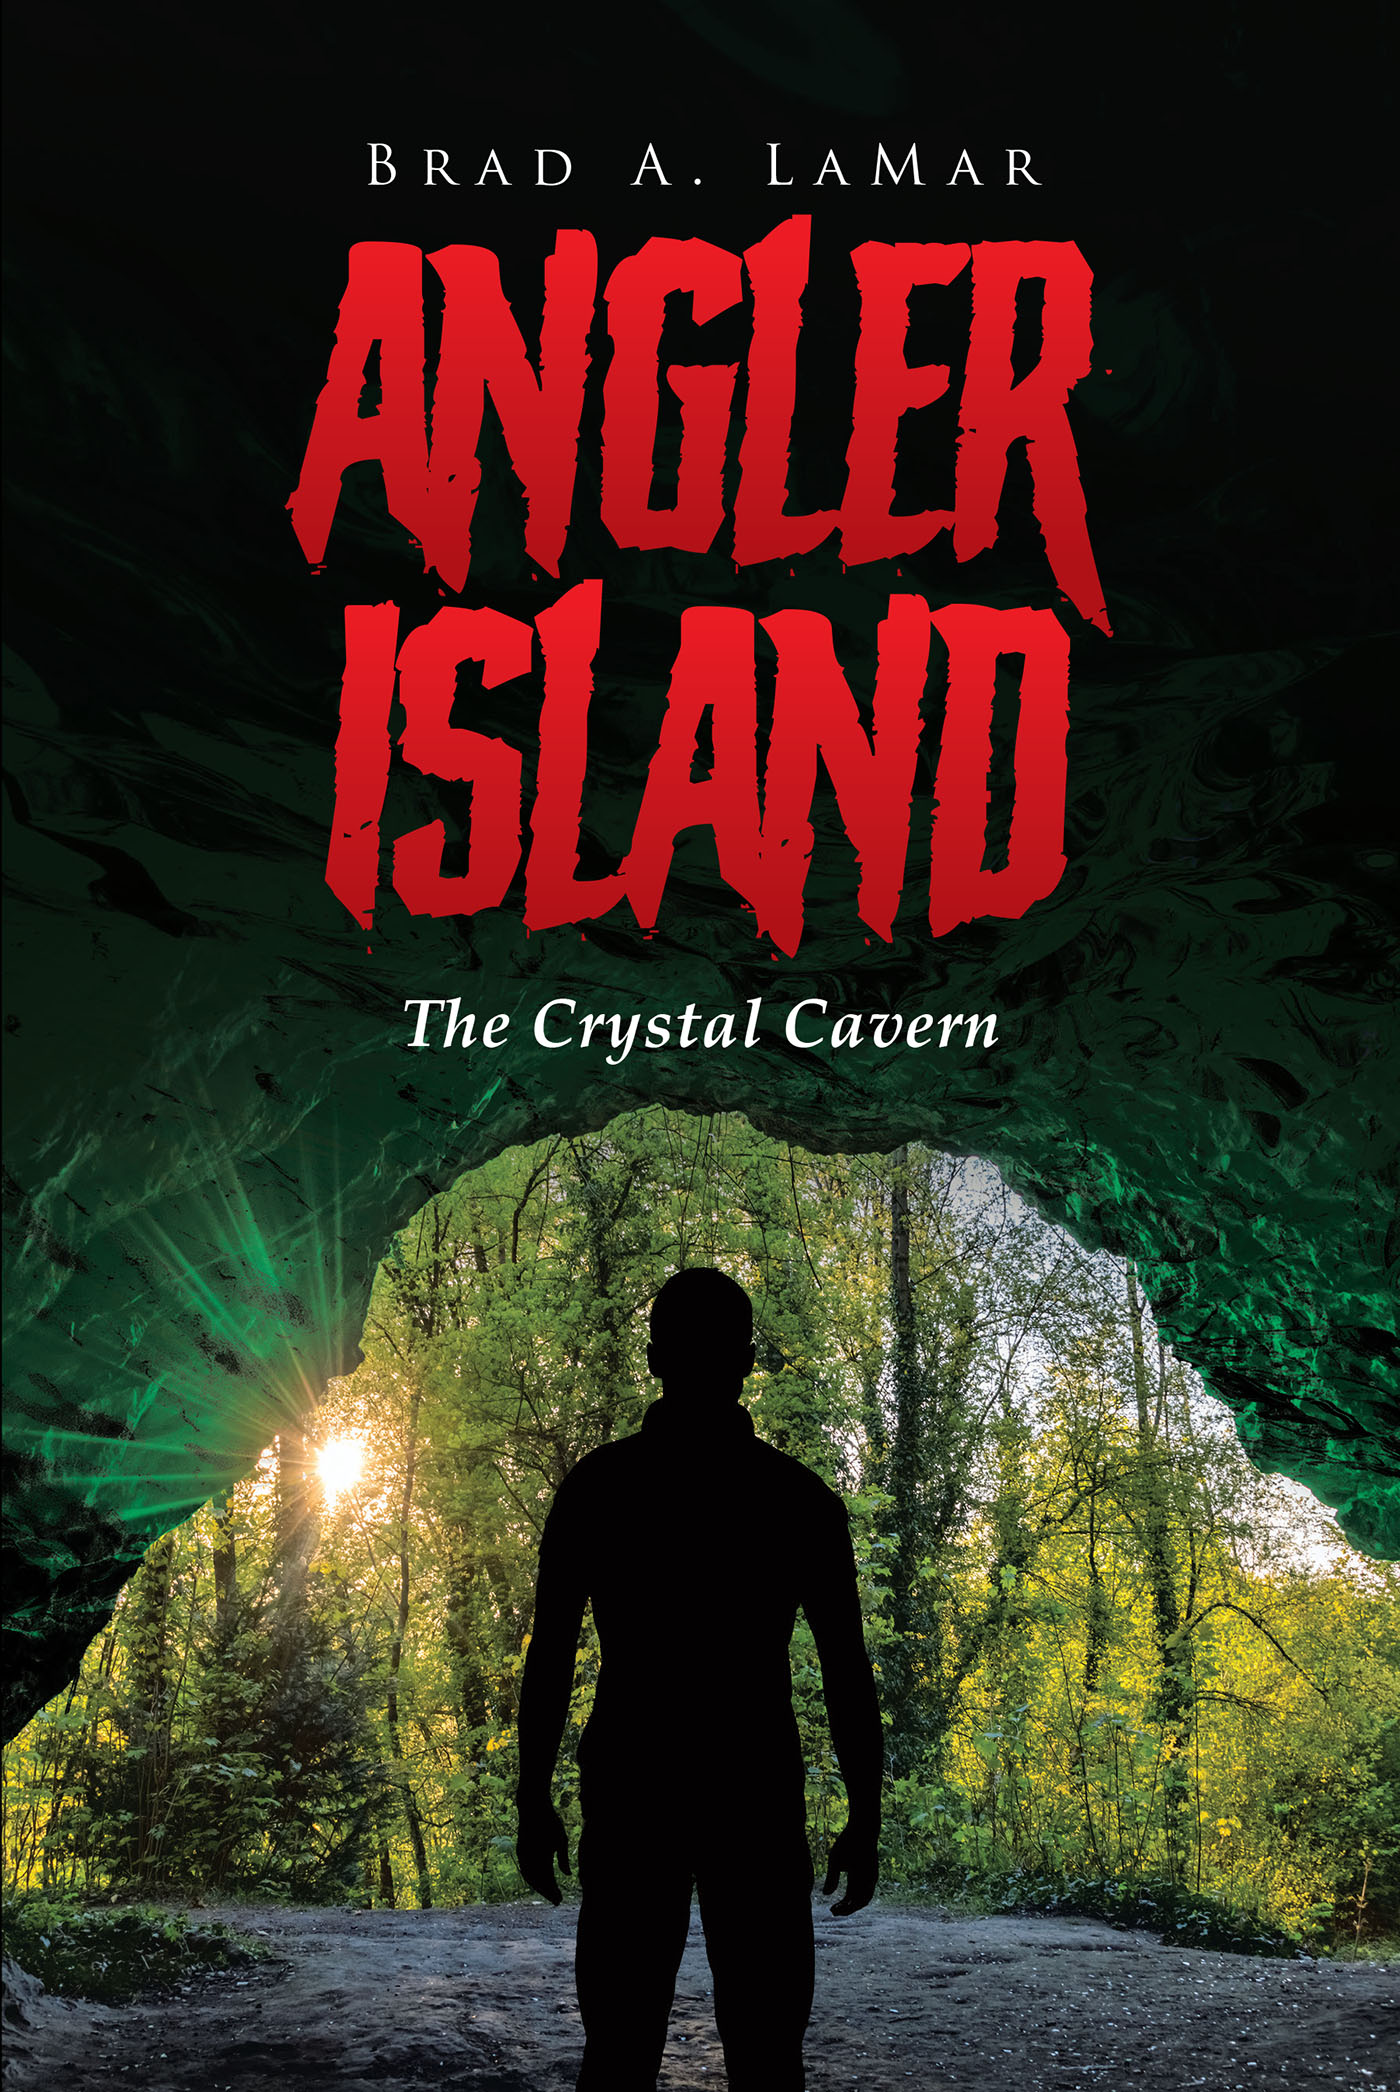 Author Brad A. Lamar’s New Book, "Angler Island: The Crystal Cavern," is the New Installment in the Angler Island Series, Picking Up Right Where the Story Left Off